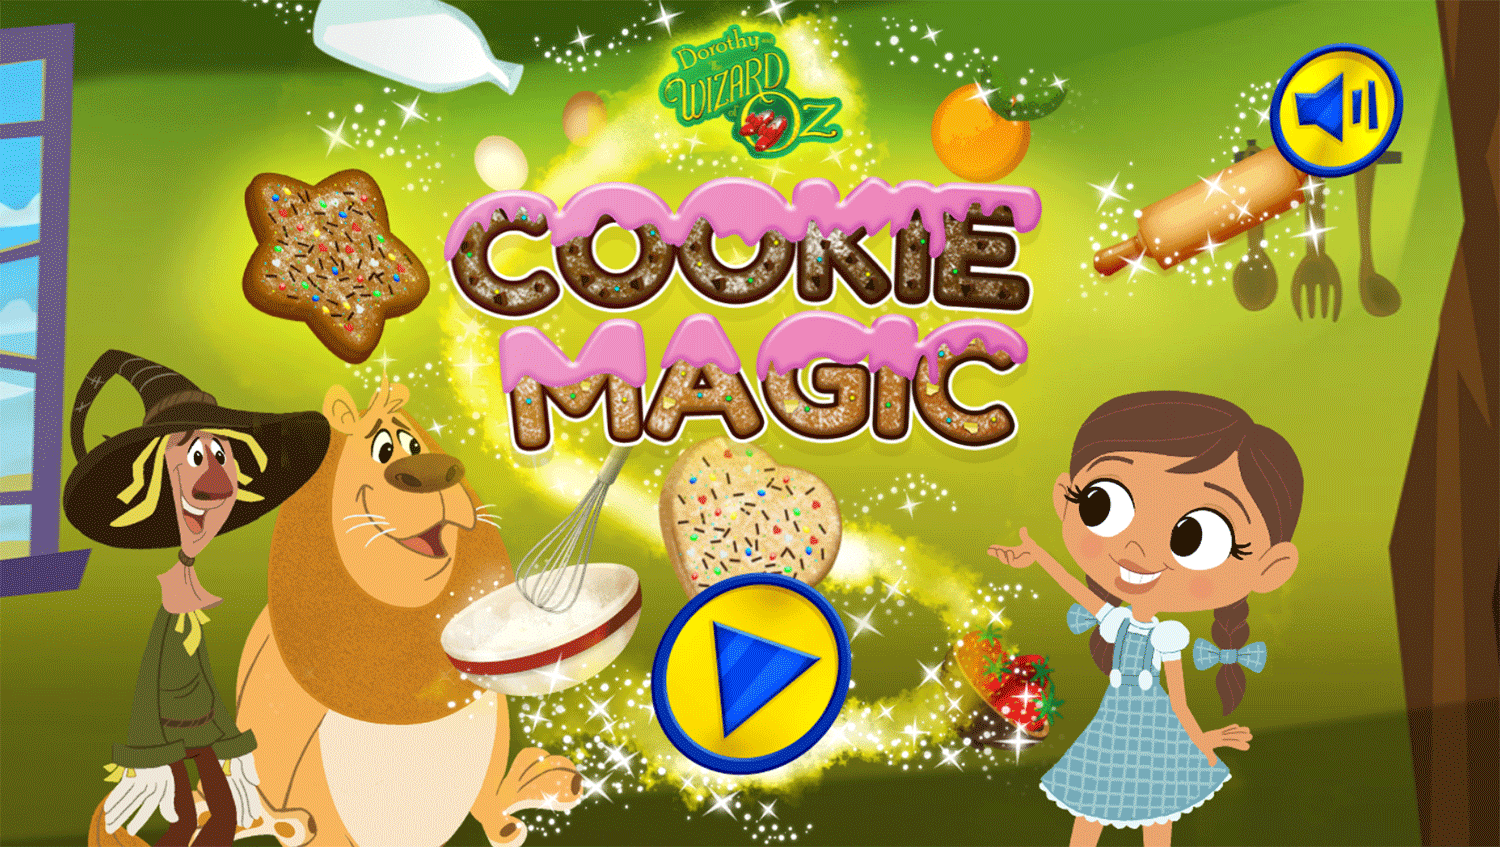 Dorothy and the Wizard of Oz Cookie Magic Game Welcome Screen Screenshot.